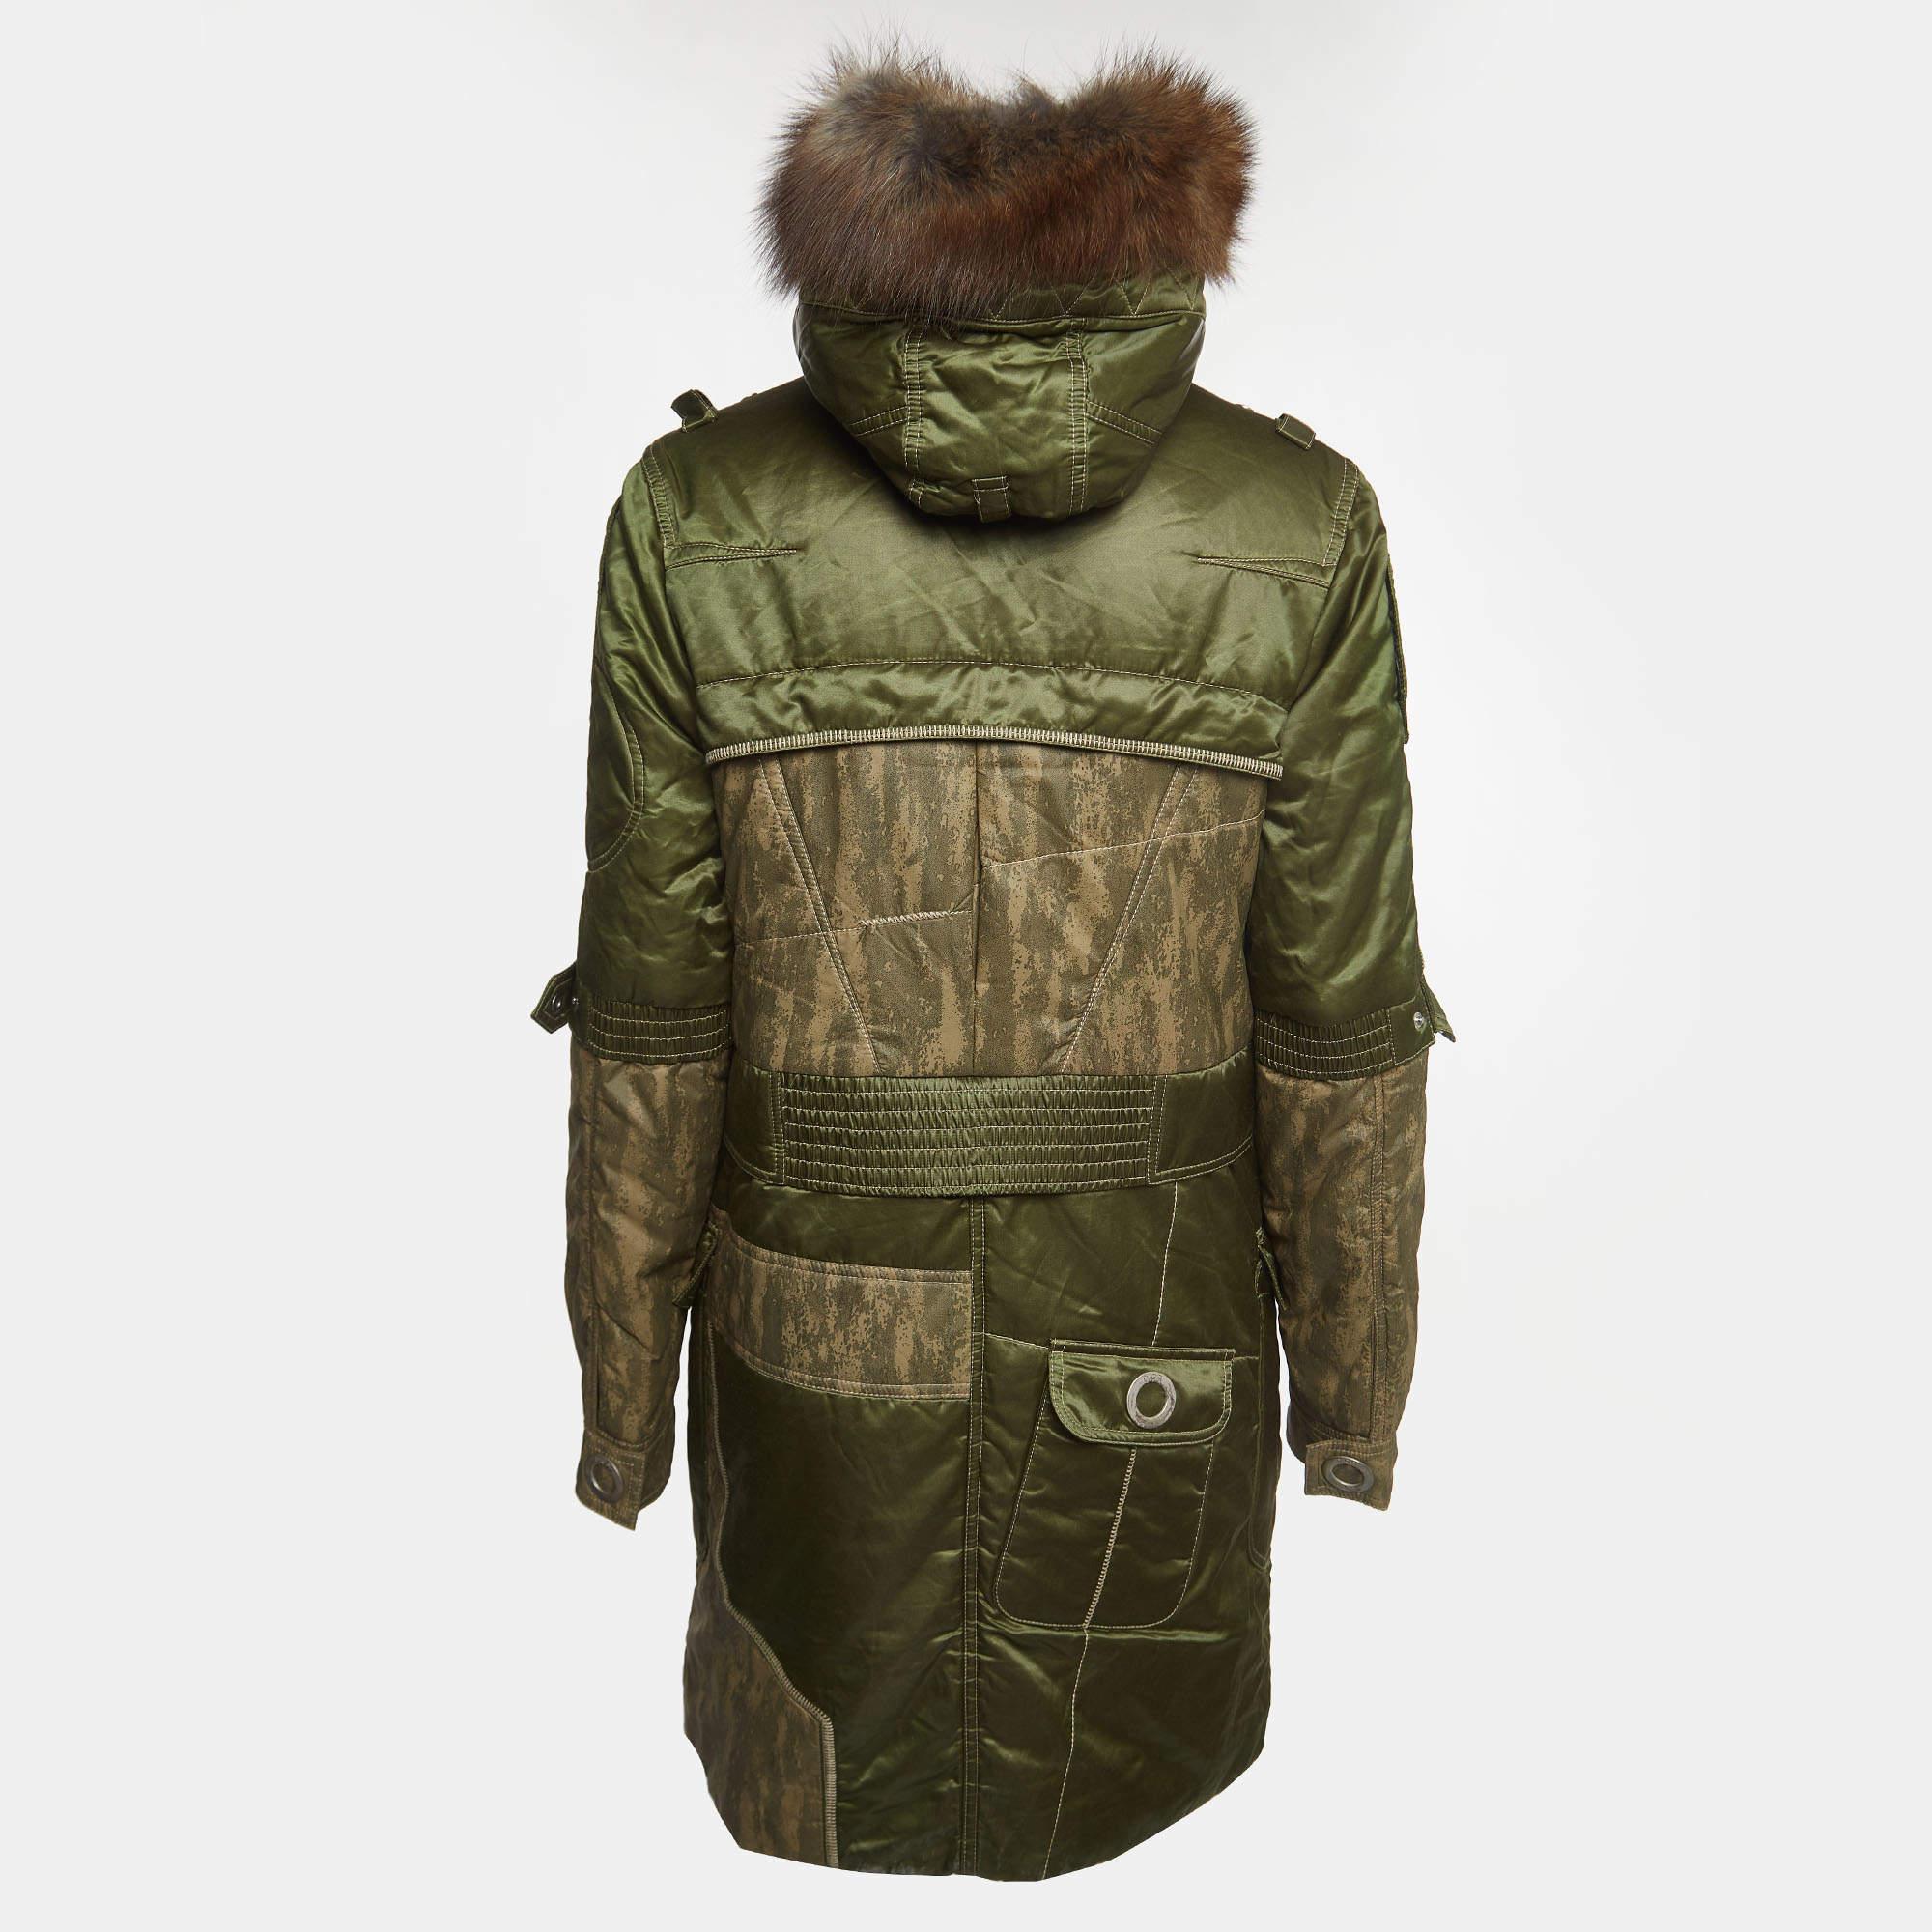 The Christian Dior Boutique parka jacket seamlessly blends luxury and functionality. Crafted with precision, this parka features a lush fur trim, elevating winter style. The rich green cotton blend exudes sophistication, making it a statement piece